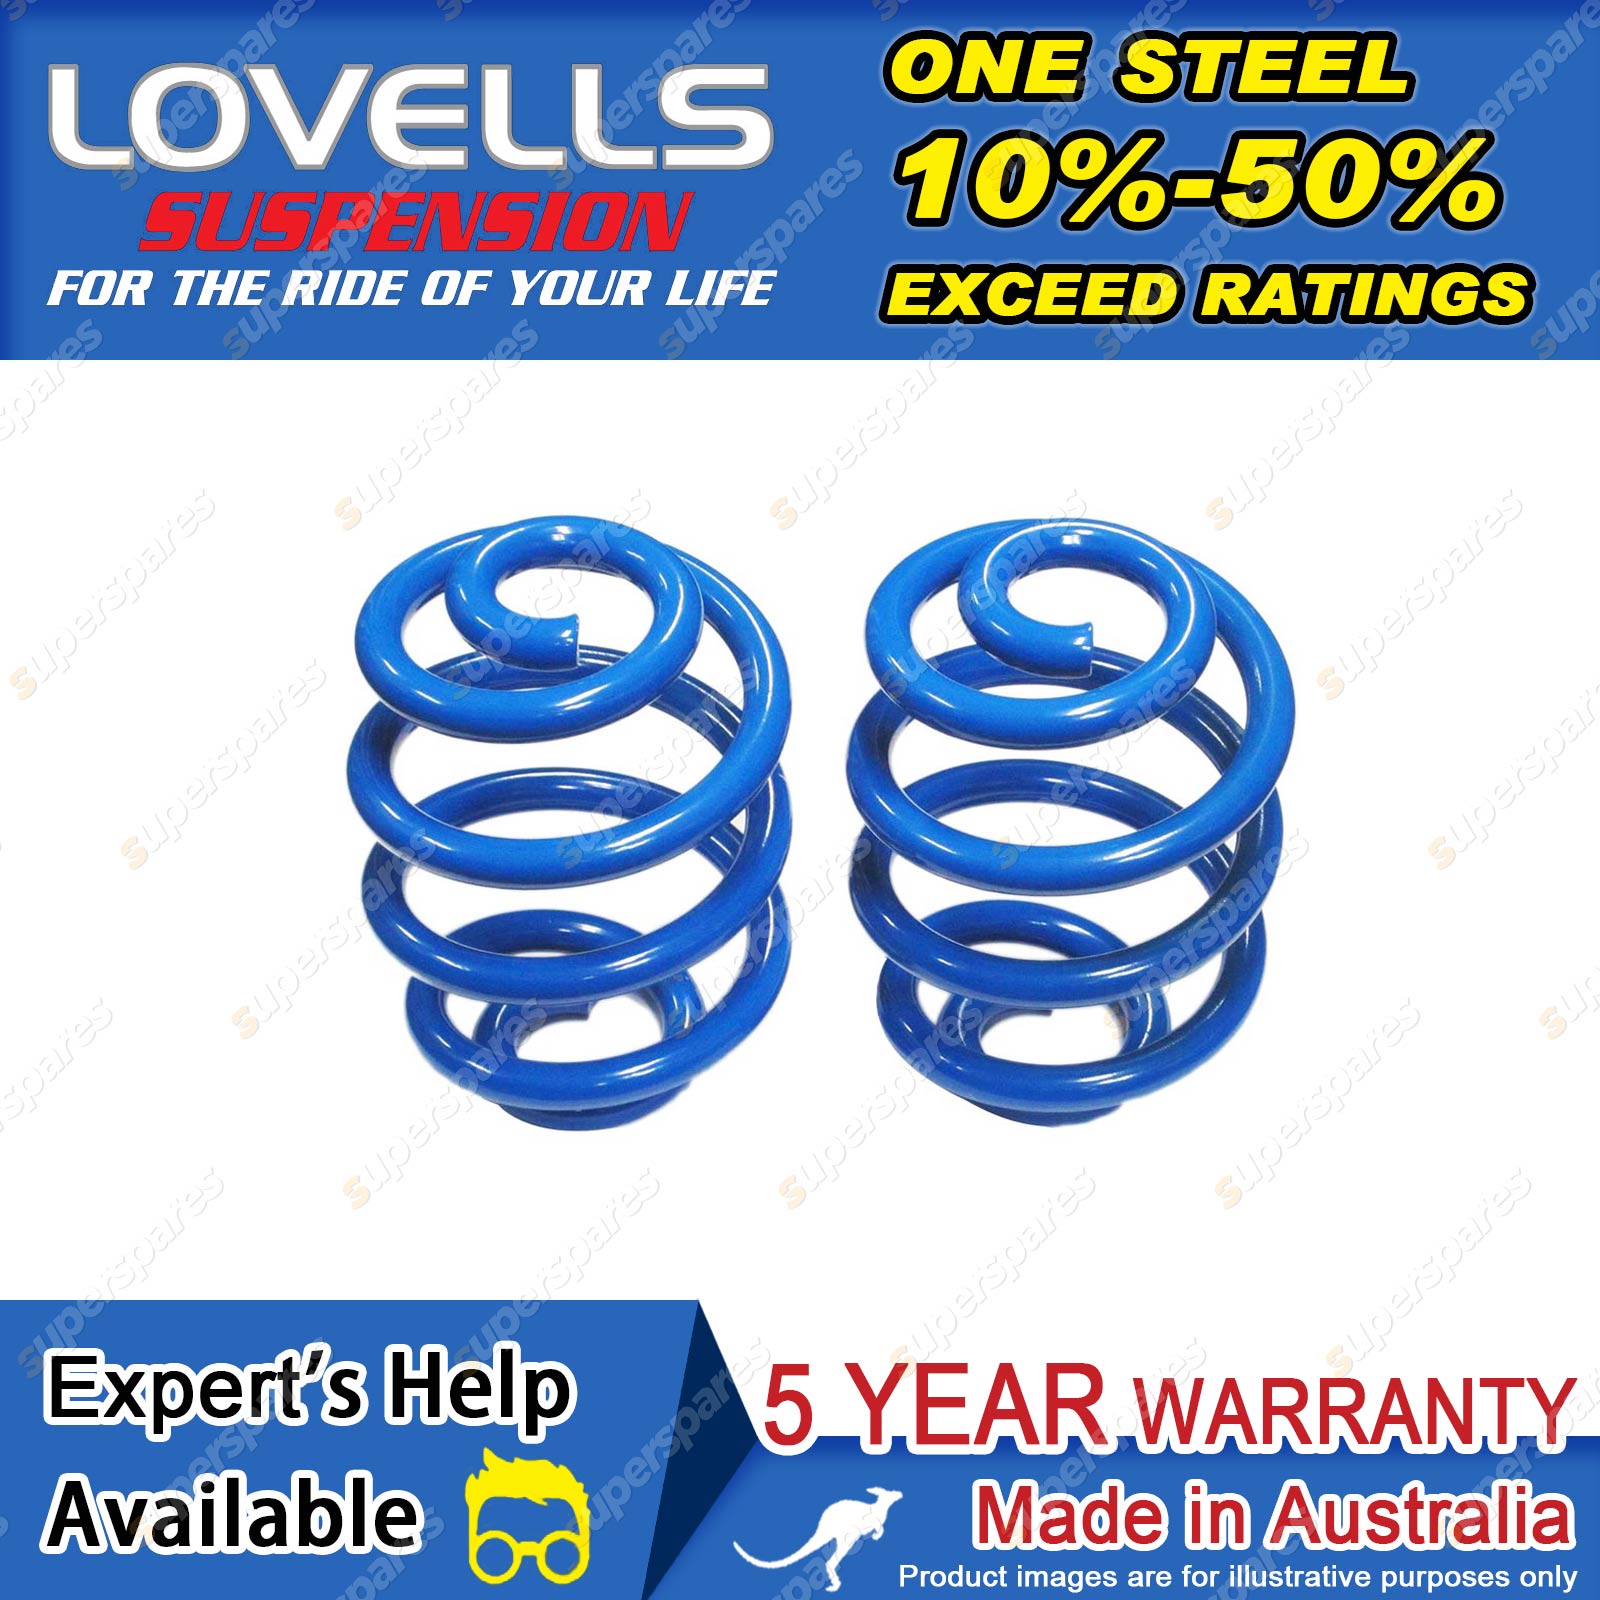 Holden Coil KING Spring PAIR HQ HJ HX HZ Wagon V8 FRONT Super Low 50mm lowered